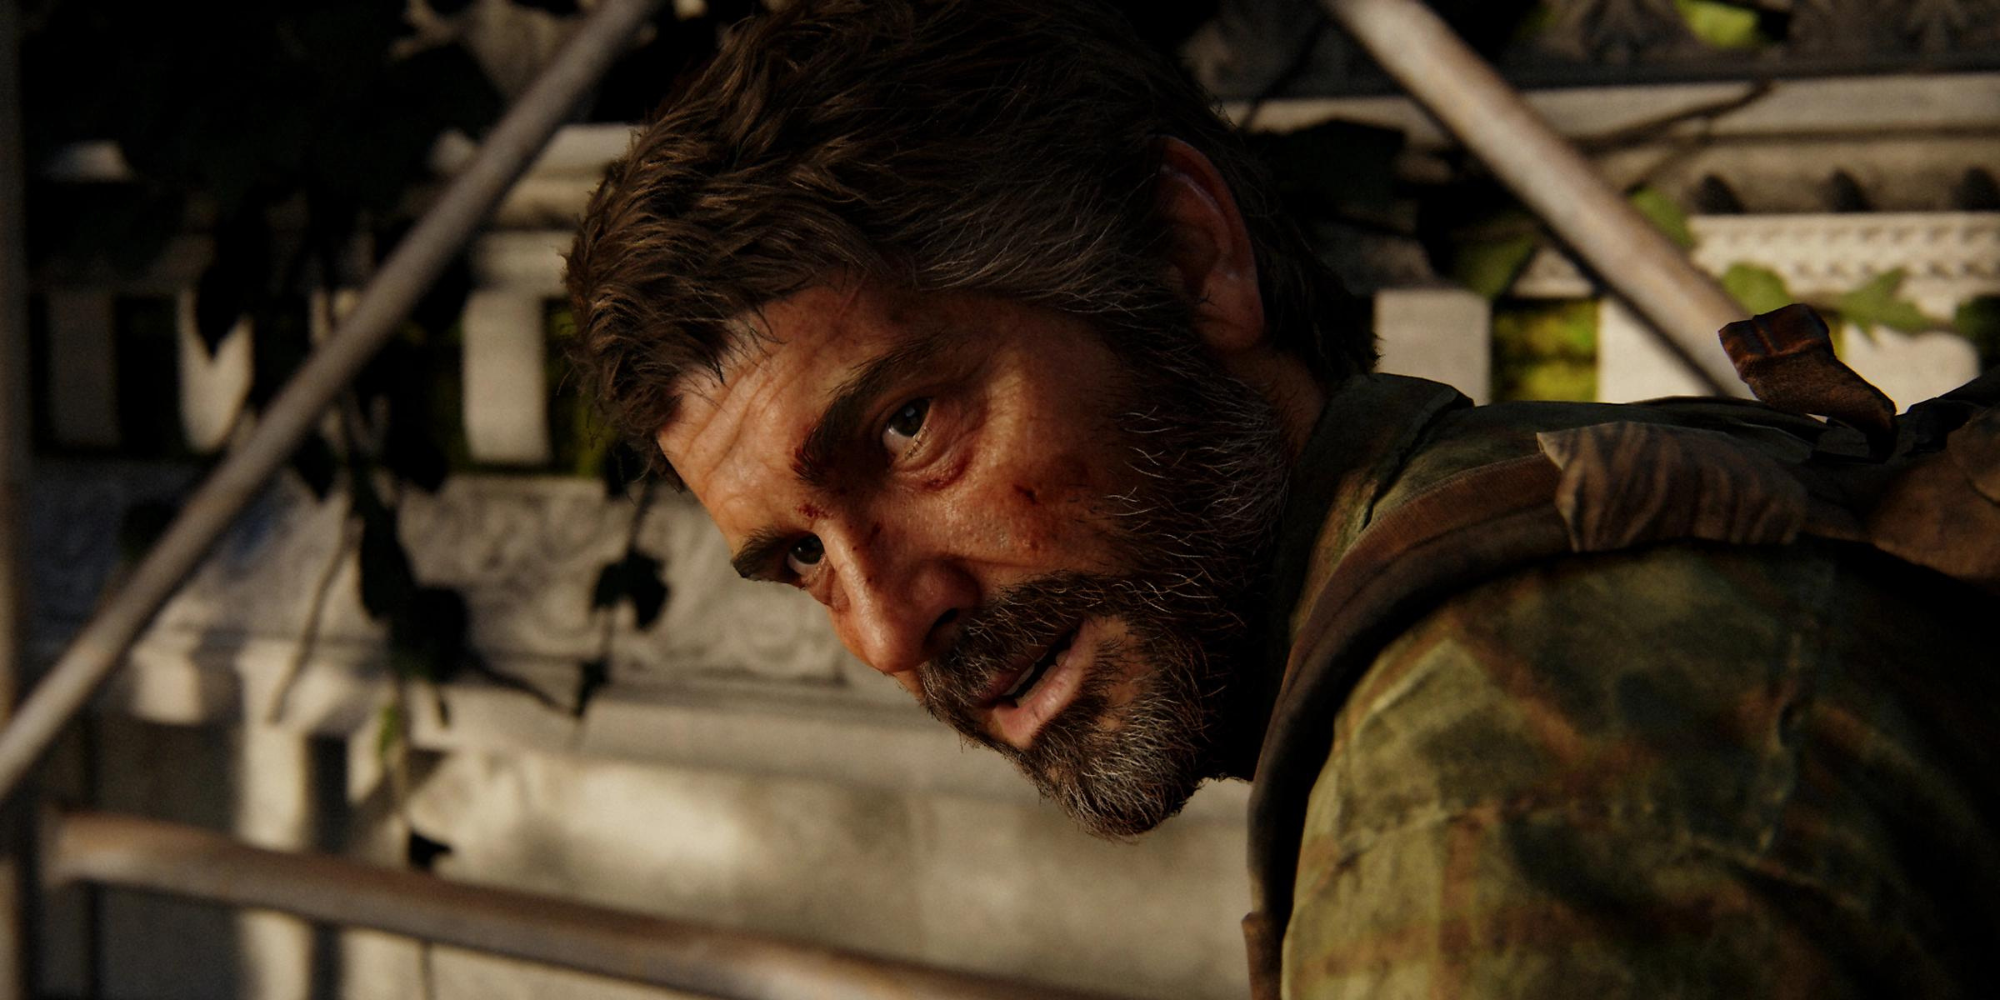 Even years after the game came out, some of The Last of Us' deaths are incredibly hard to watch.